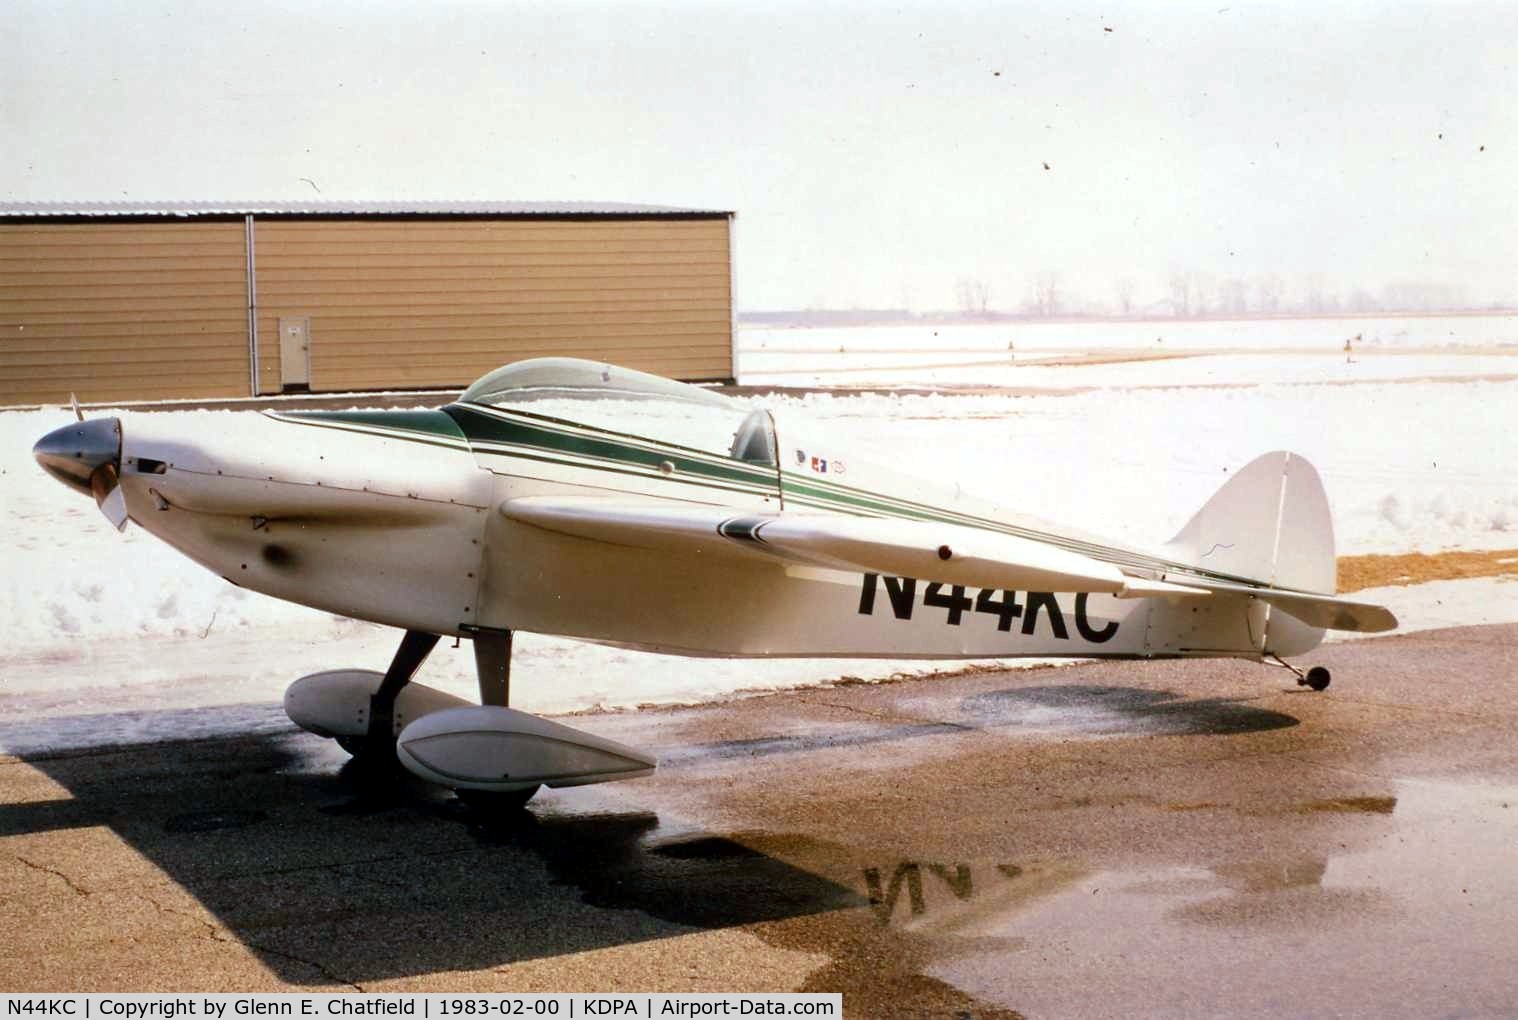 N44KC, 1977 Monnett Sonerai II C/N 00291, Photo taken for aircraft recognition training as example of home-builts